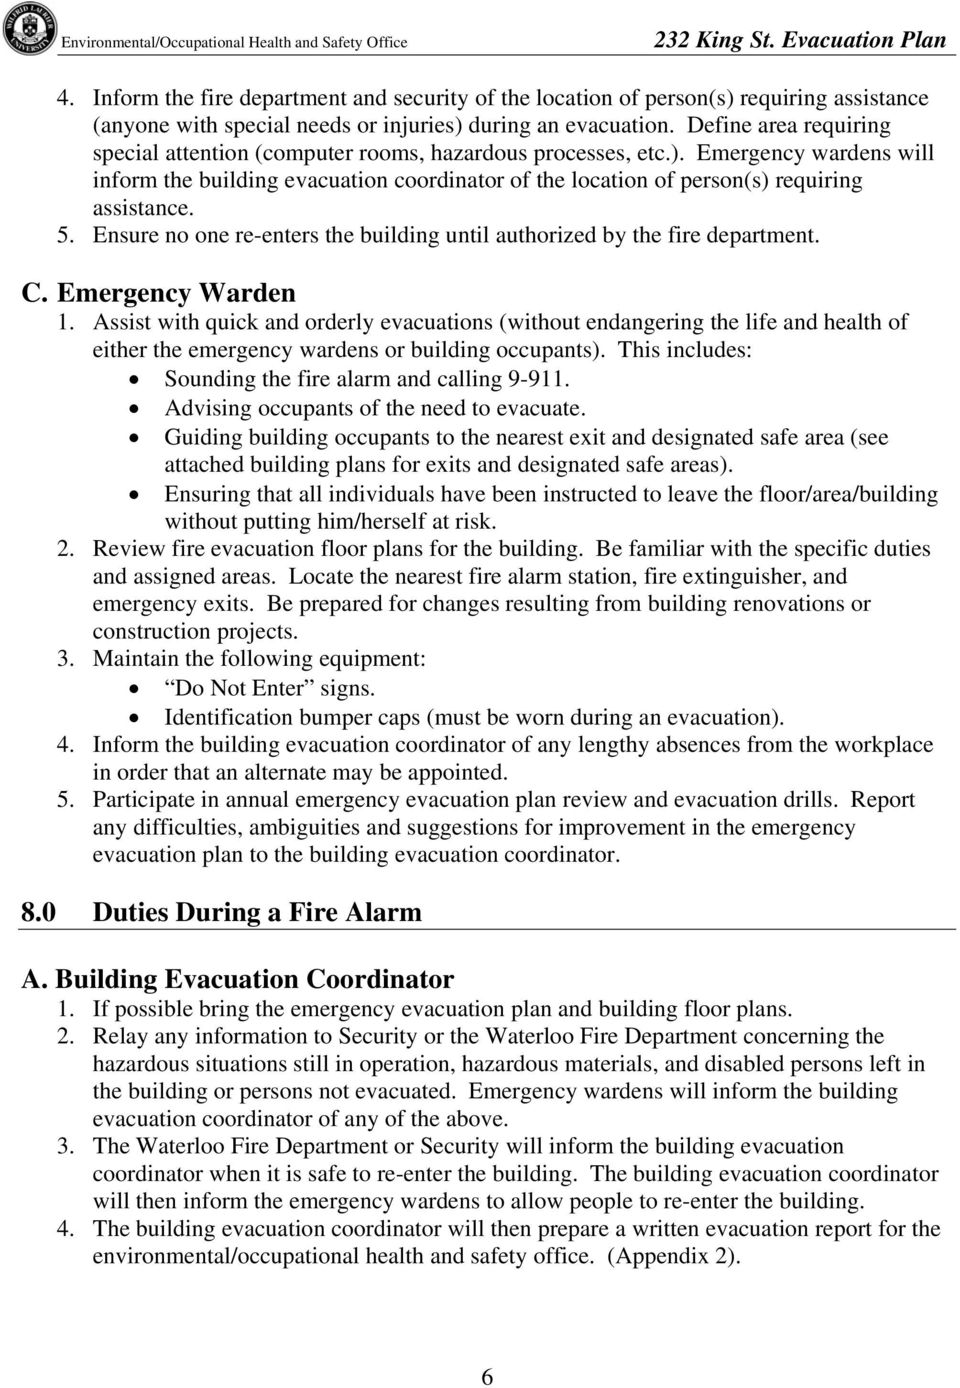 Emergency wardens will inform the building evacuation coordinator of the location of person(s) requiring assistance. 5. Ensure no one re-enters the building until authorized by the fire department. C.